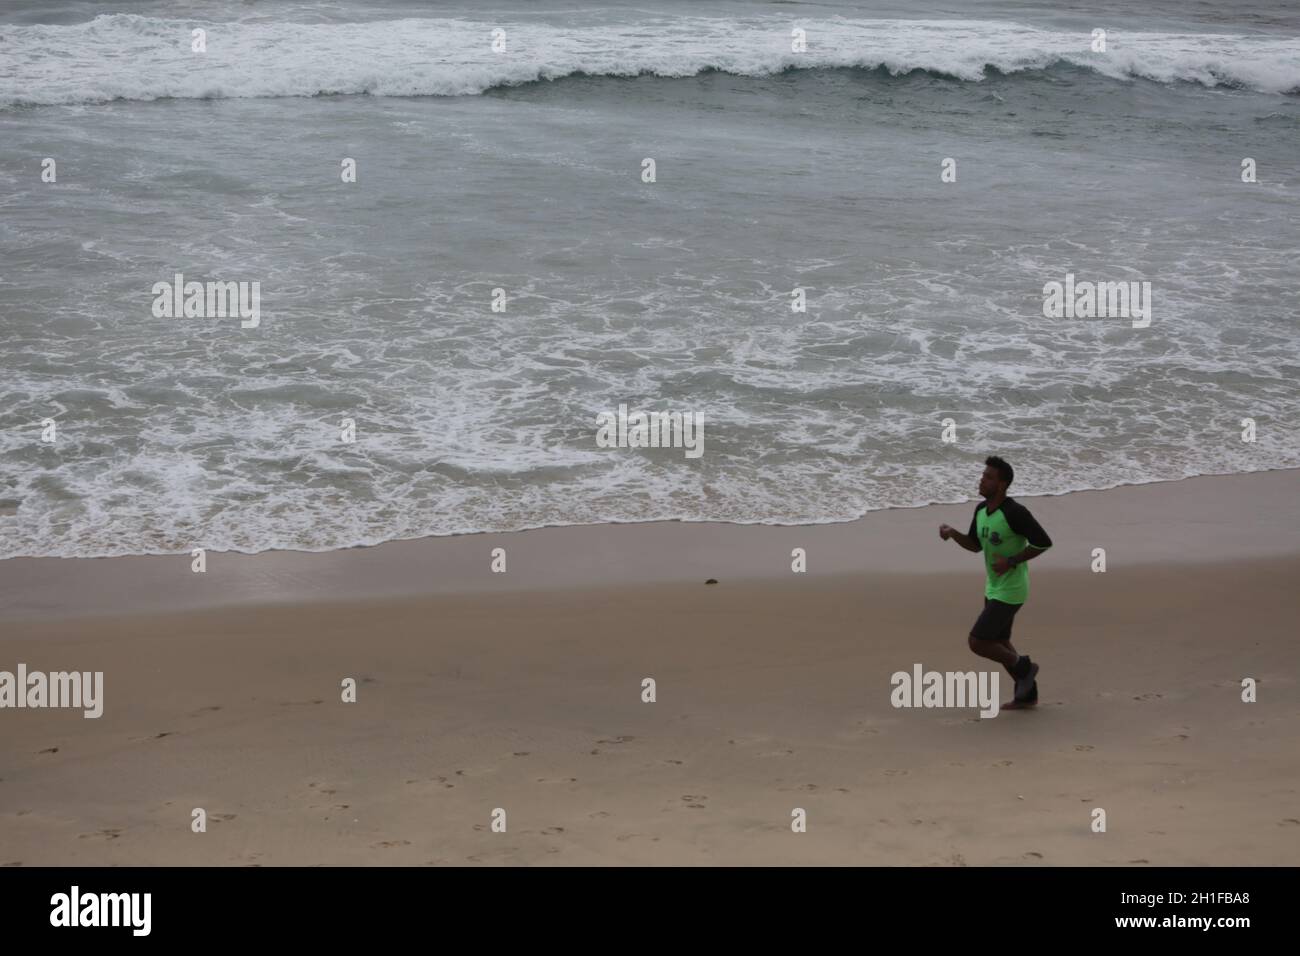 salvador, bahia / brazil - july 10, 2017: Man is seen at the Itapua Mermaid Beach in the city of Salvador. *** Local Caption *** Stock Photo